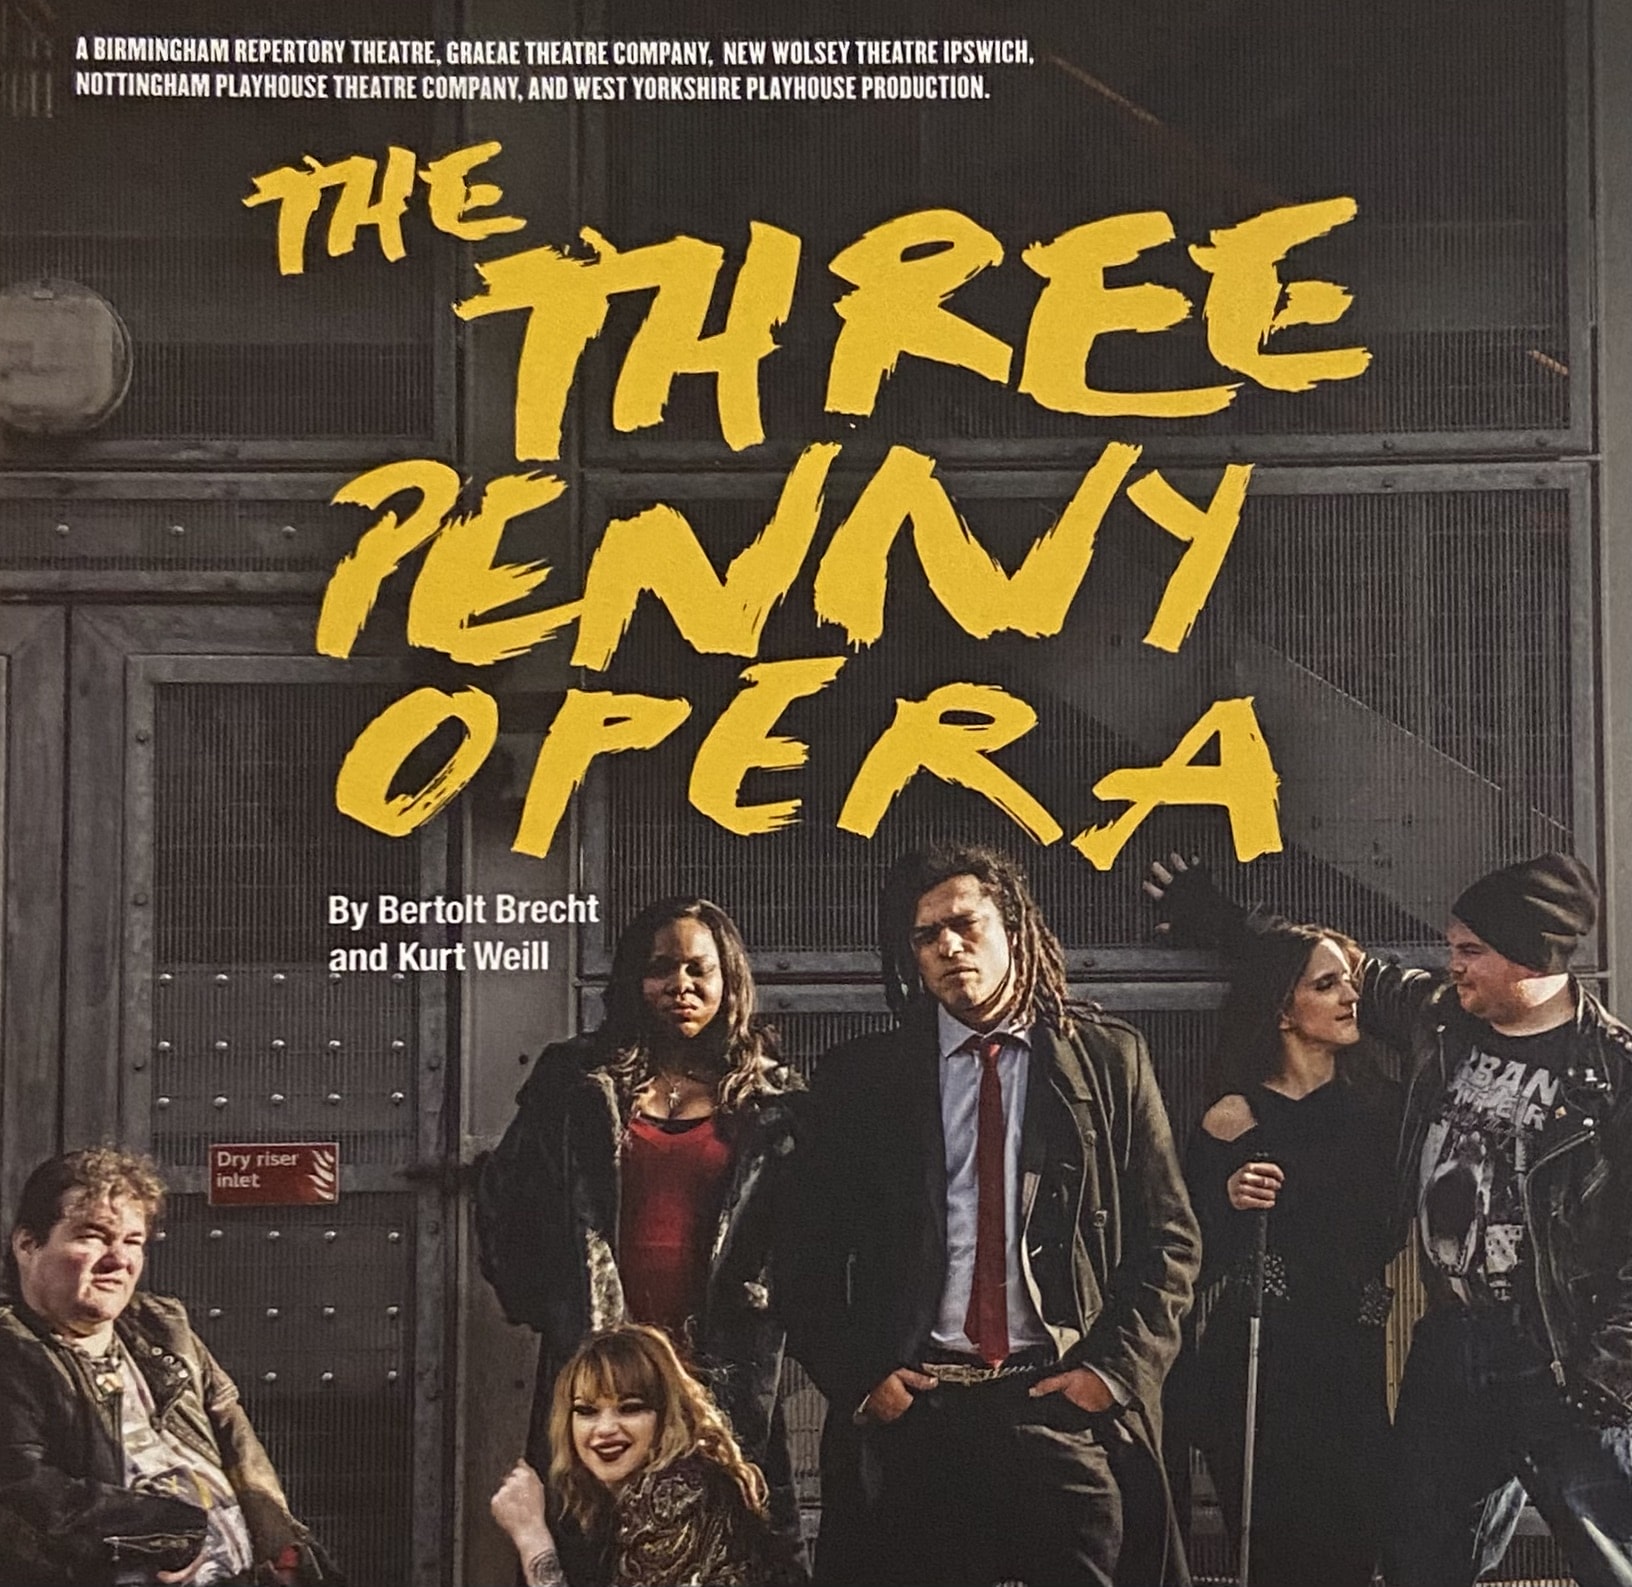 Poster for The Three Penny Opera, 6 performers pose looking menacingly at the camera